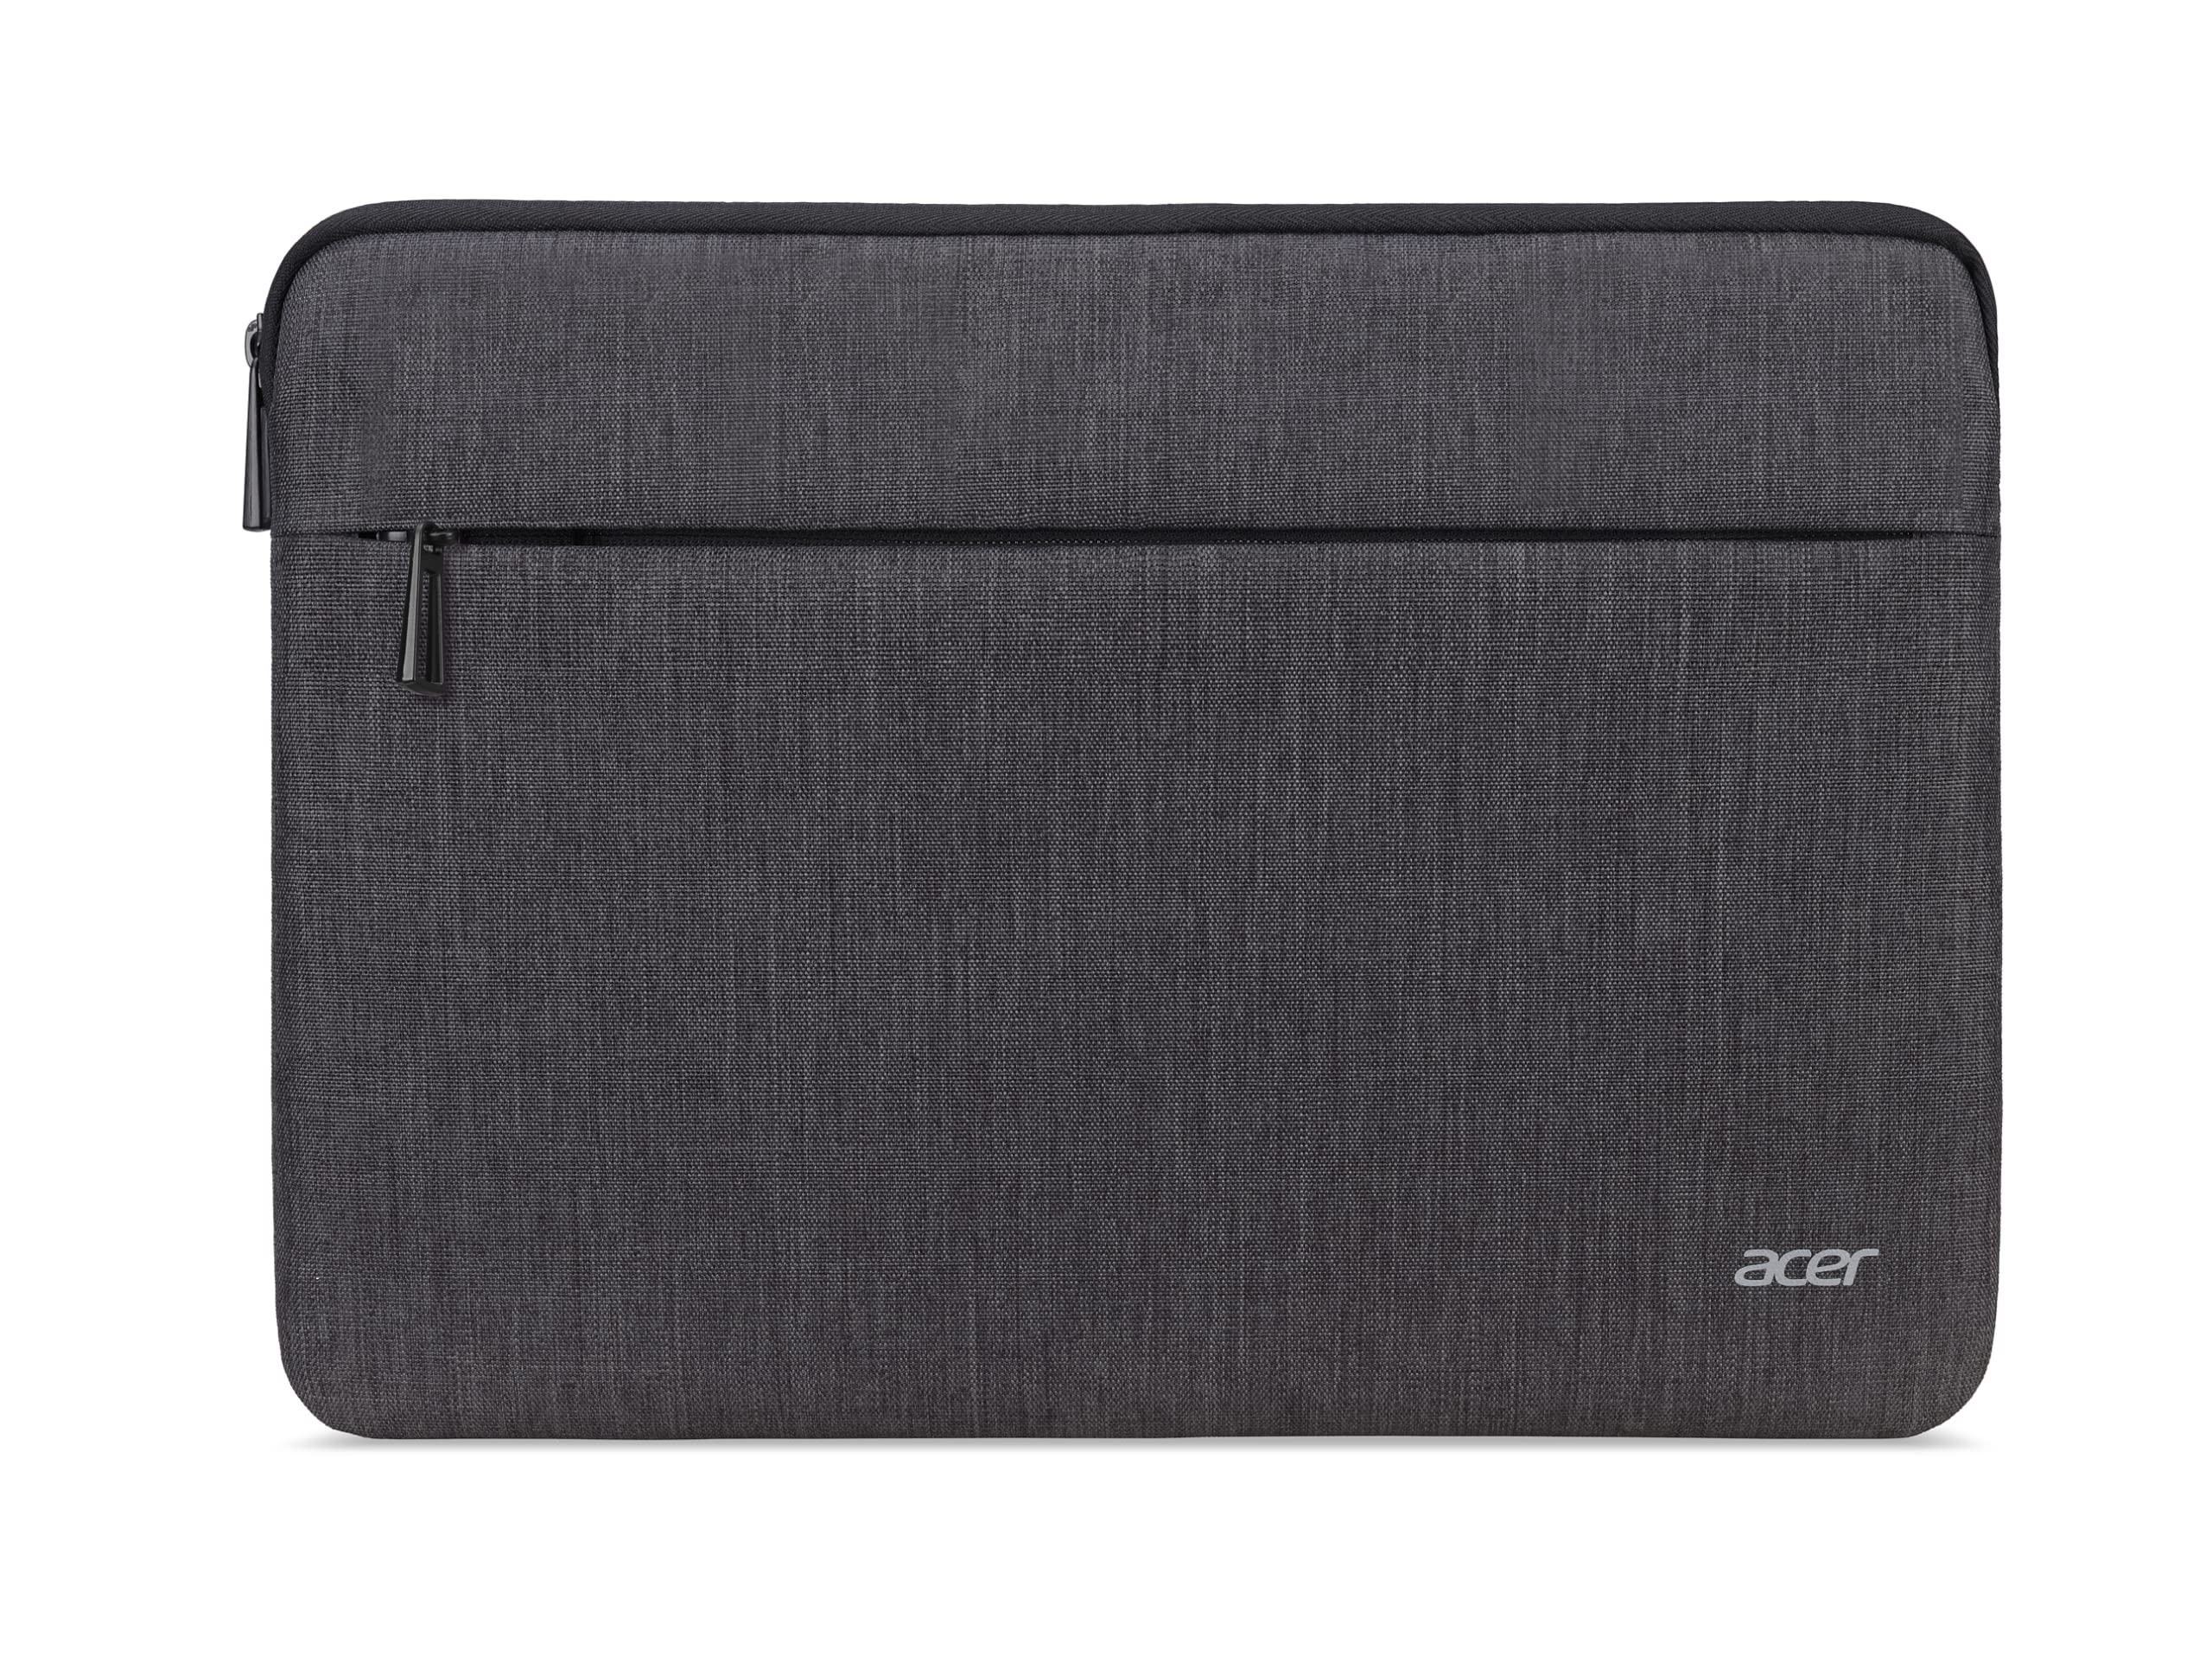 Acer Aspire 3 Spin 14 Convertible Laptop | 14